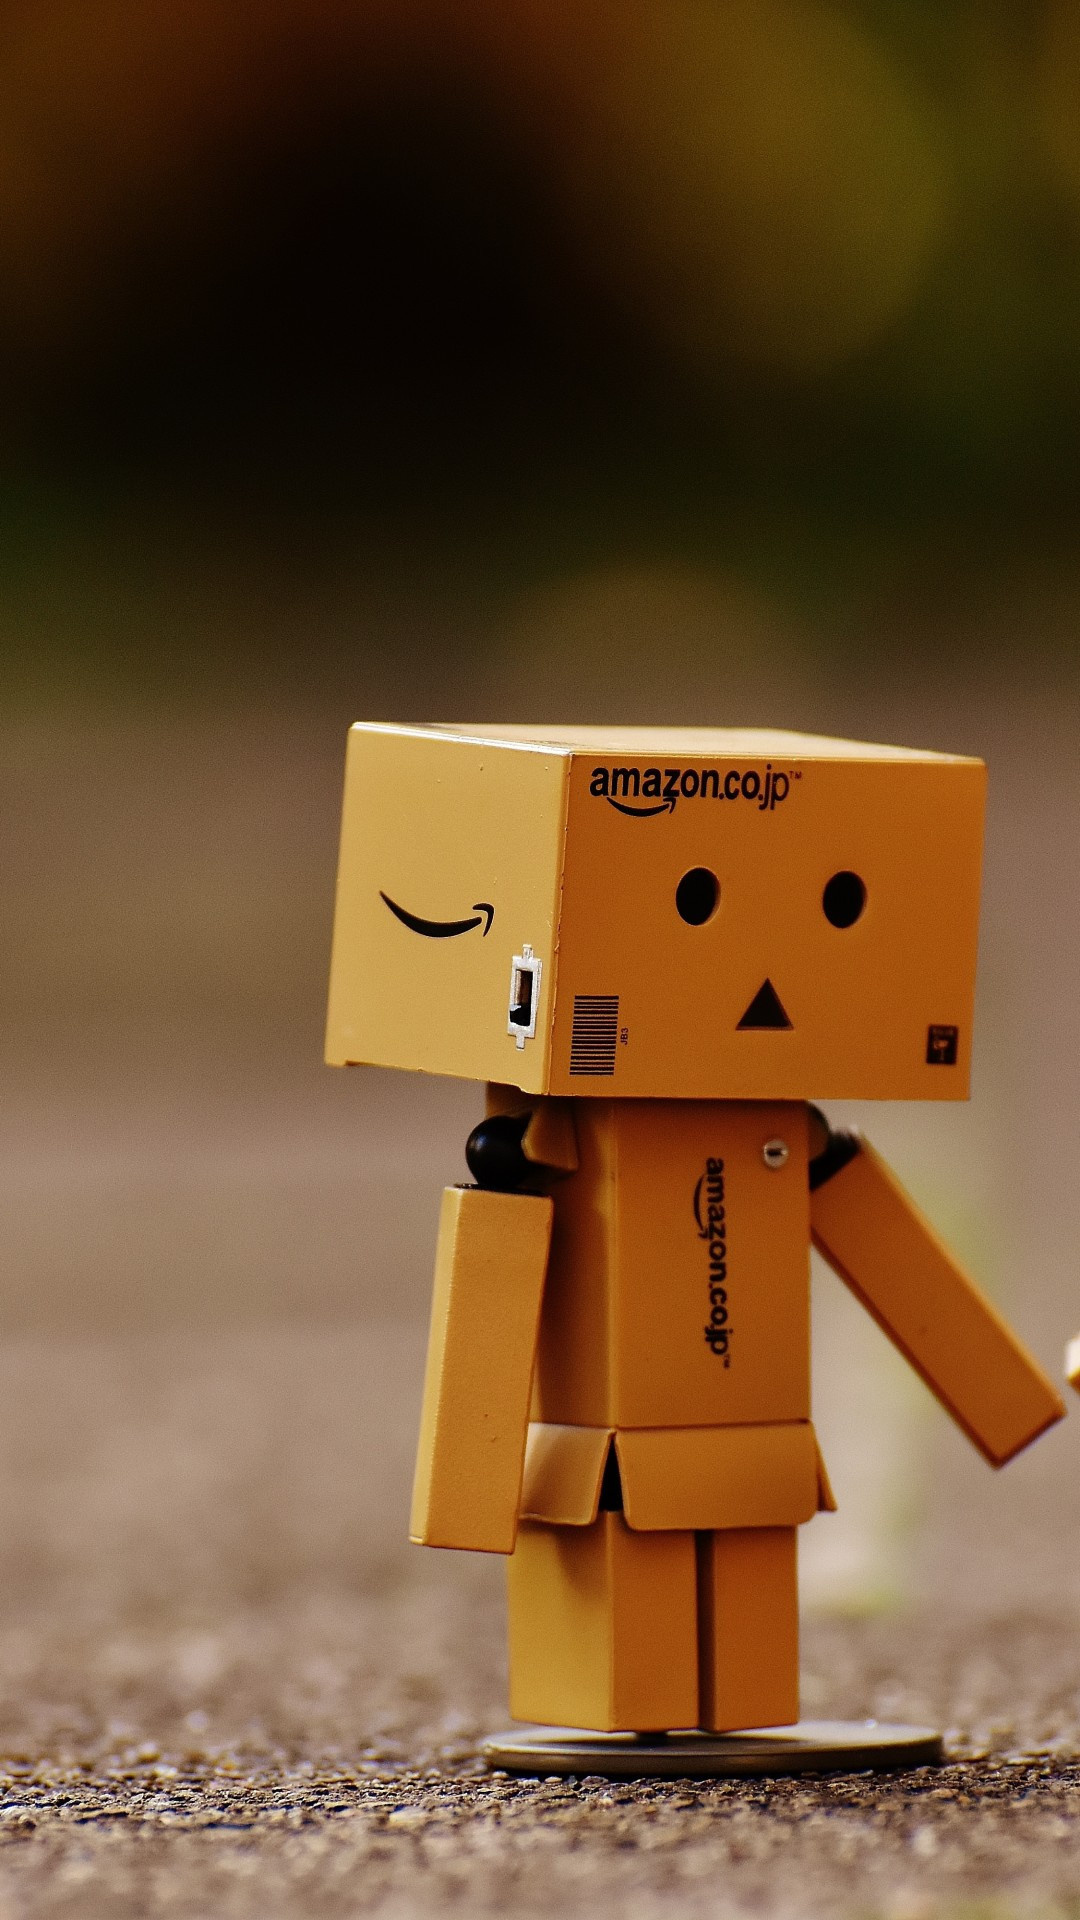 Amazon: Danbo, A fictional cardboard box robot, Acquired Zappos for $850 million in 2008. 1080x1920 Full HD Background.